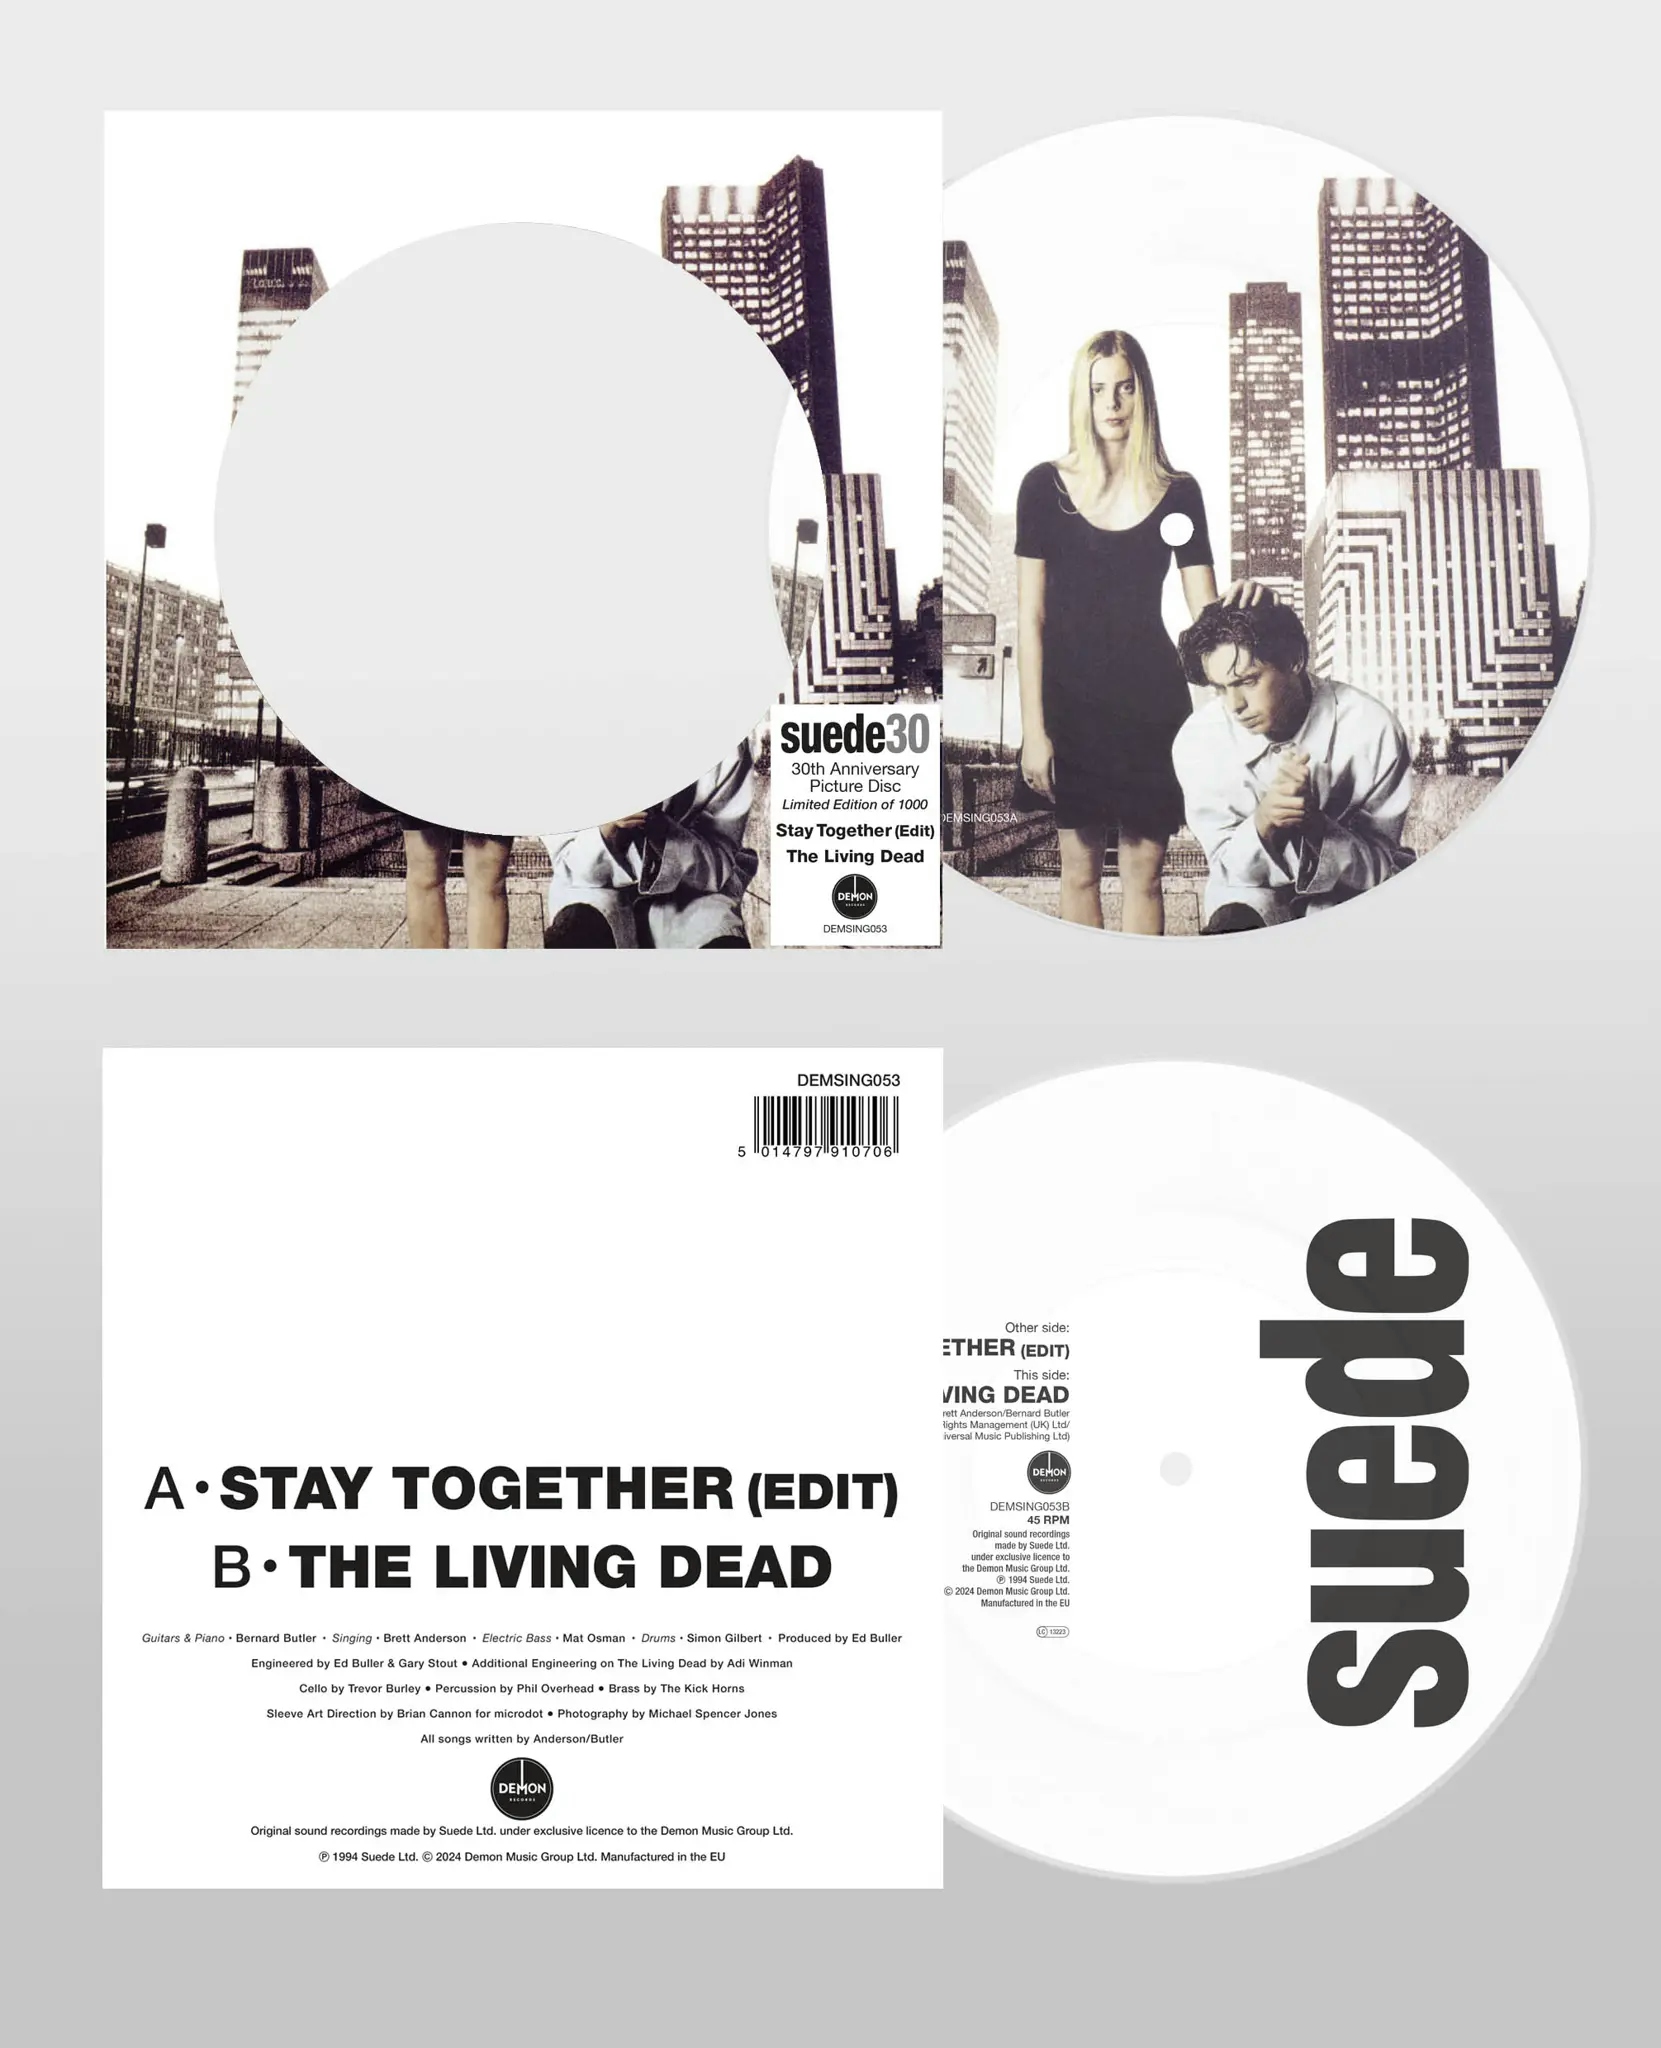 Album artwork for Album artwork for Stay Together  by Suede by Stay Together  - Suede